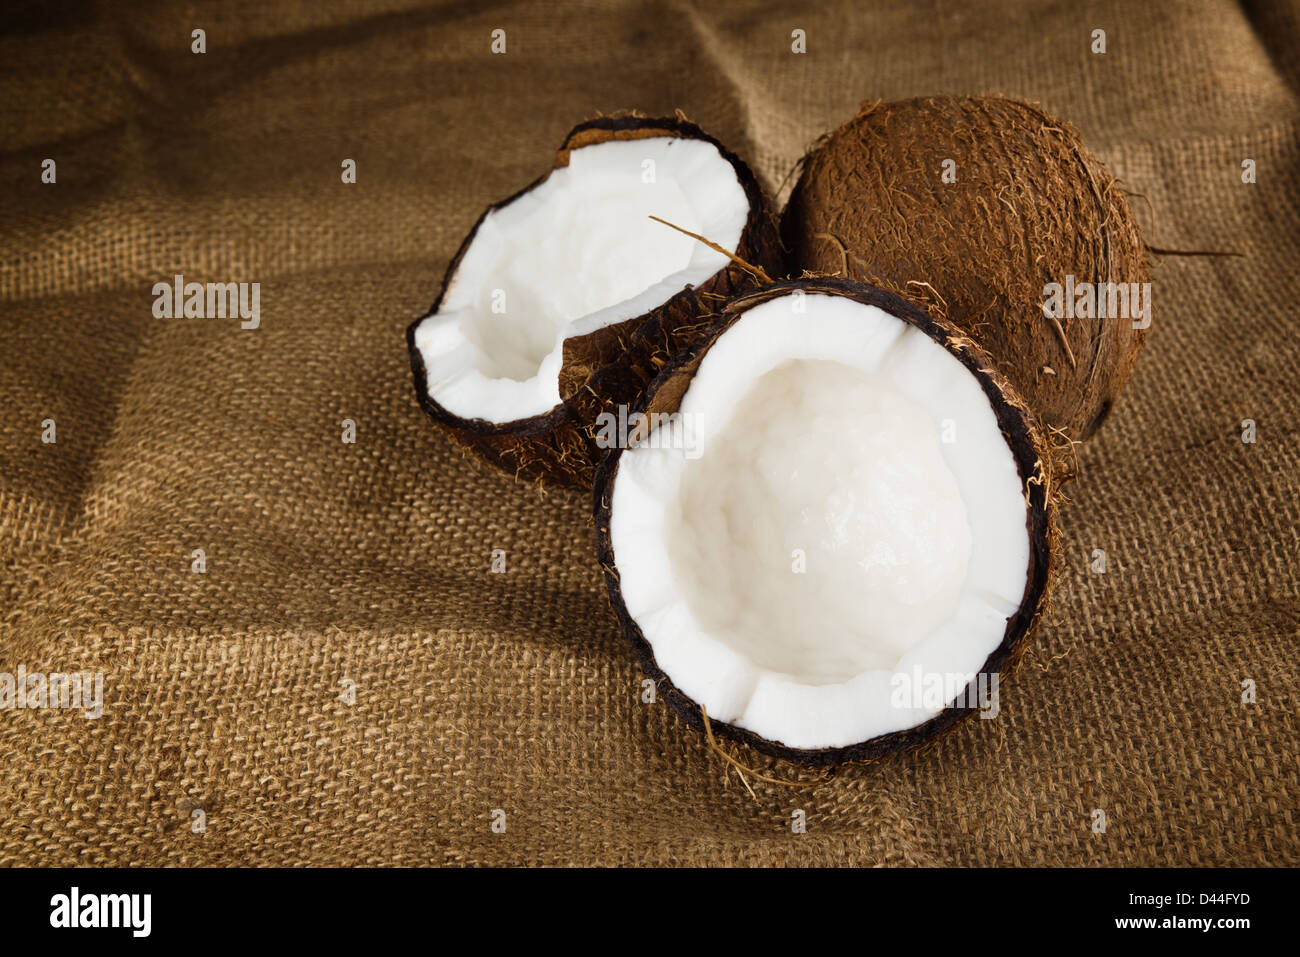 Two coconuts on a cloth background. Coconut is tasty tropic fruit. Stock Photo